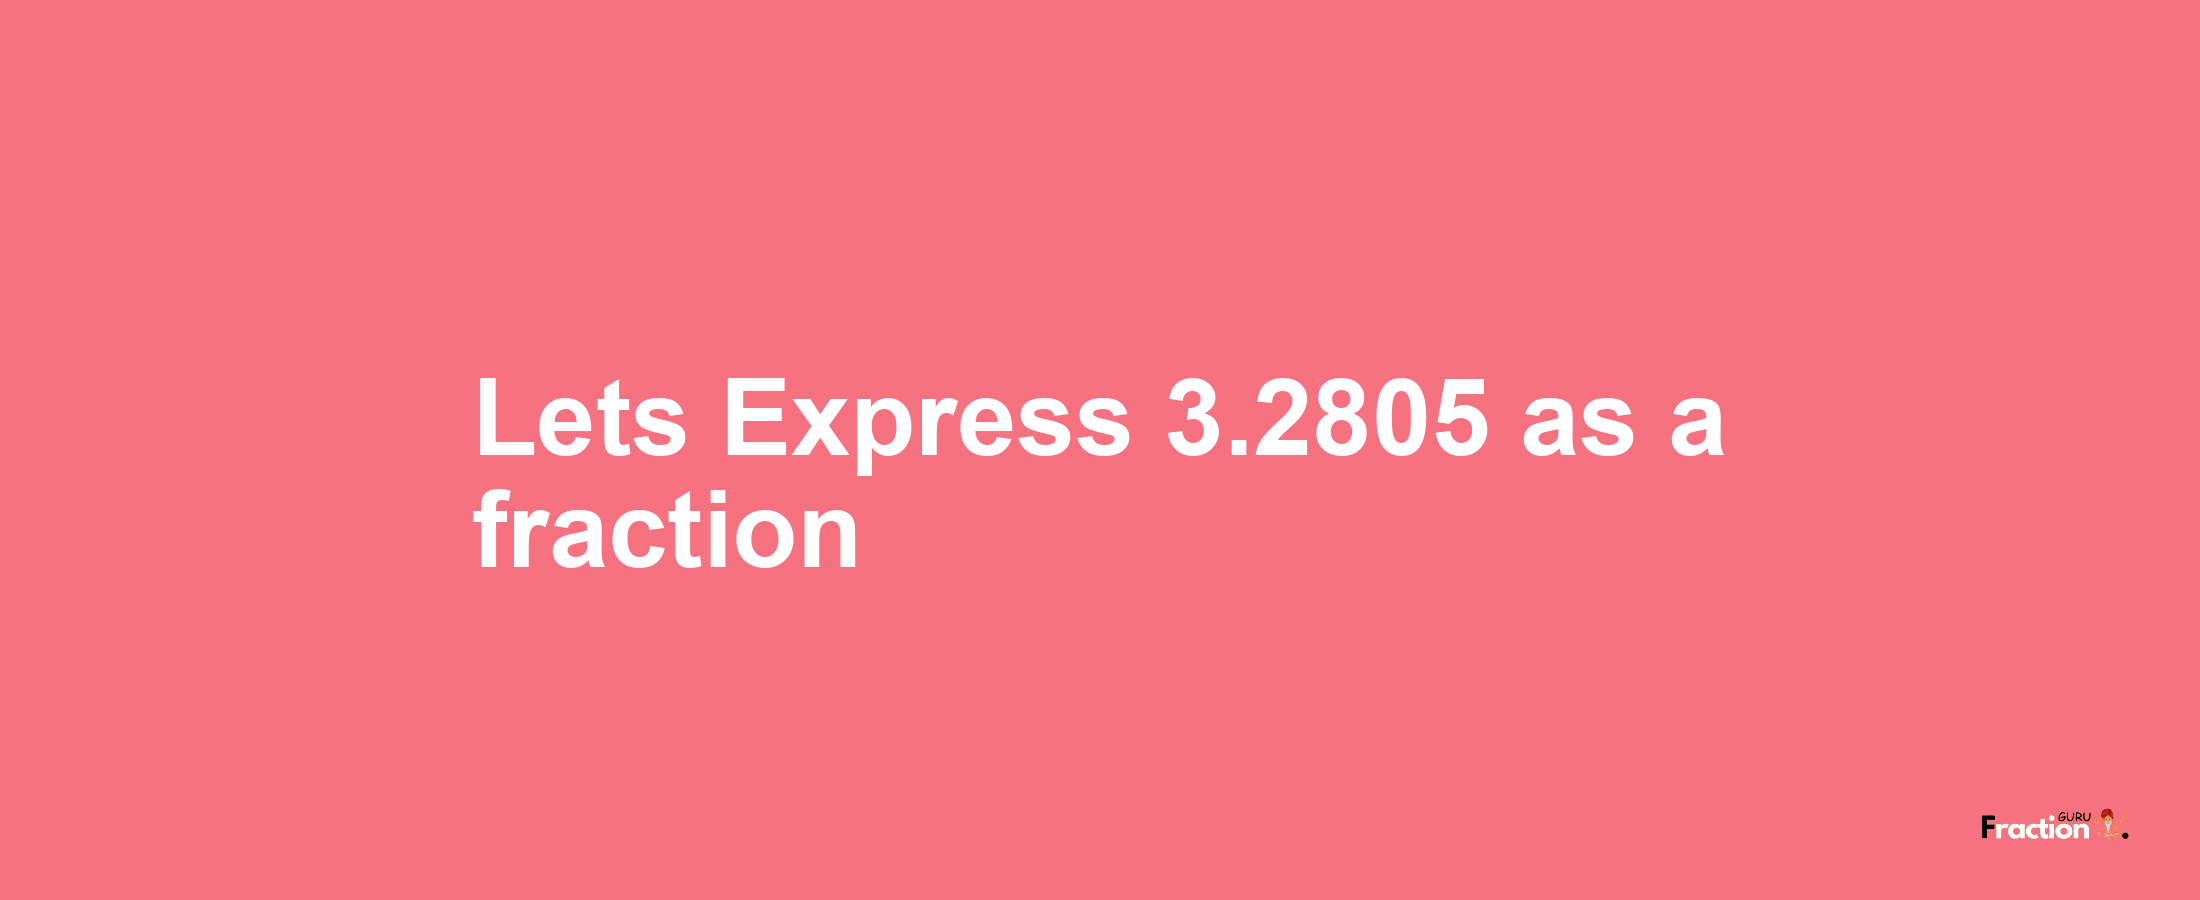 Lets Express 3.2805 as afraction